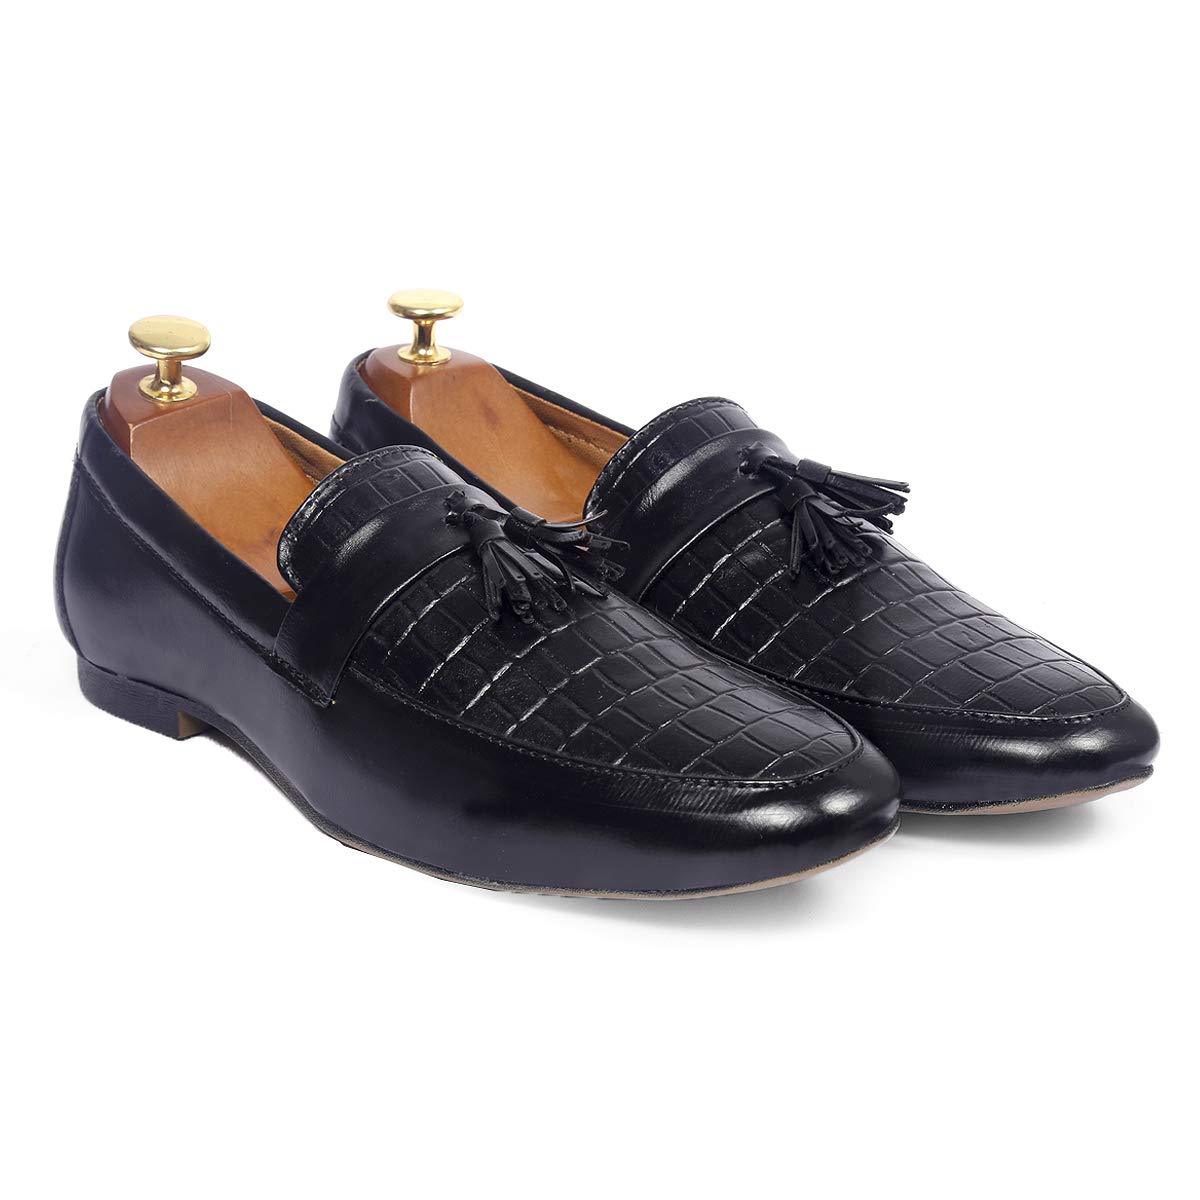 New High Quality Formal For Office And Party Wear Loafer & Moccasins Shoe-Unique and Classy